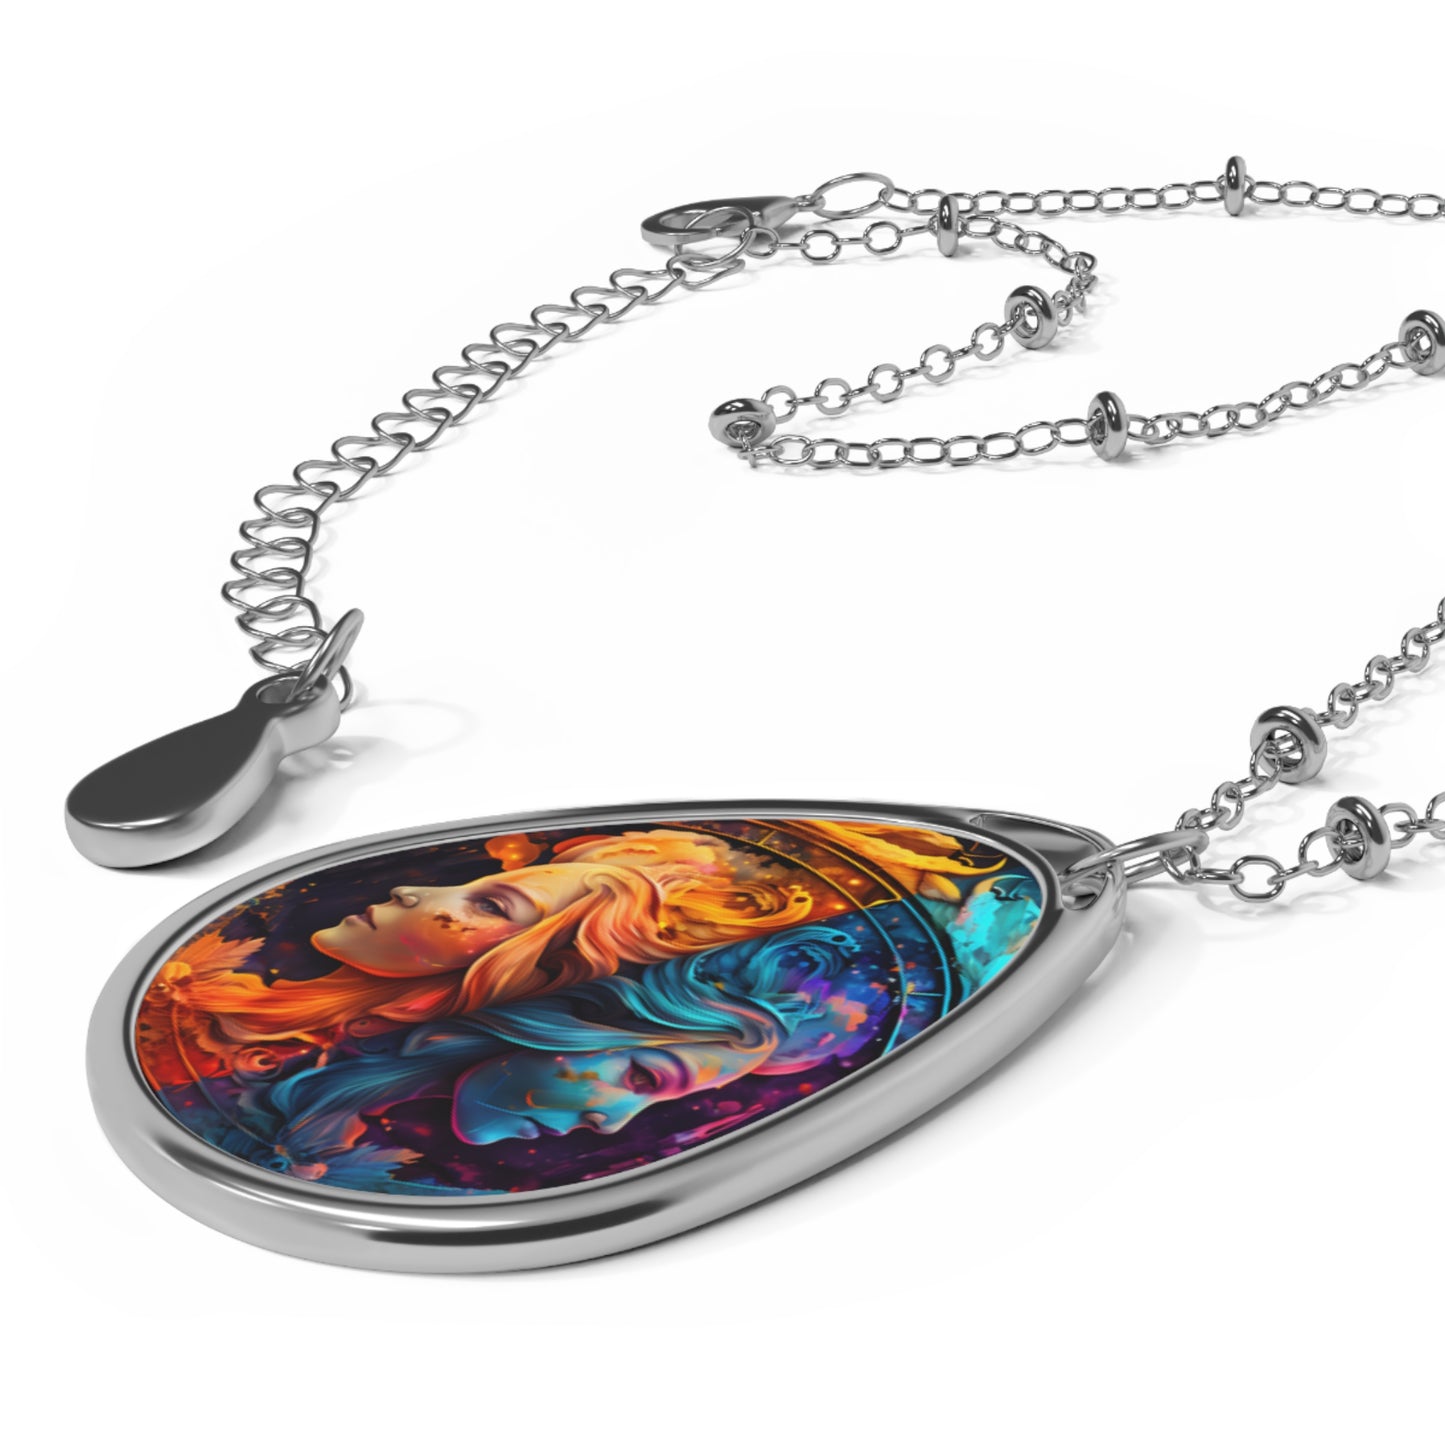 Gemini Zodiac Sign Fire and Water Twins ~ Necklace & Oval Pendant With Chain